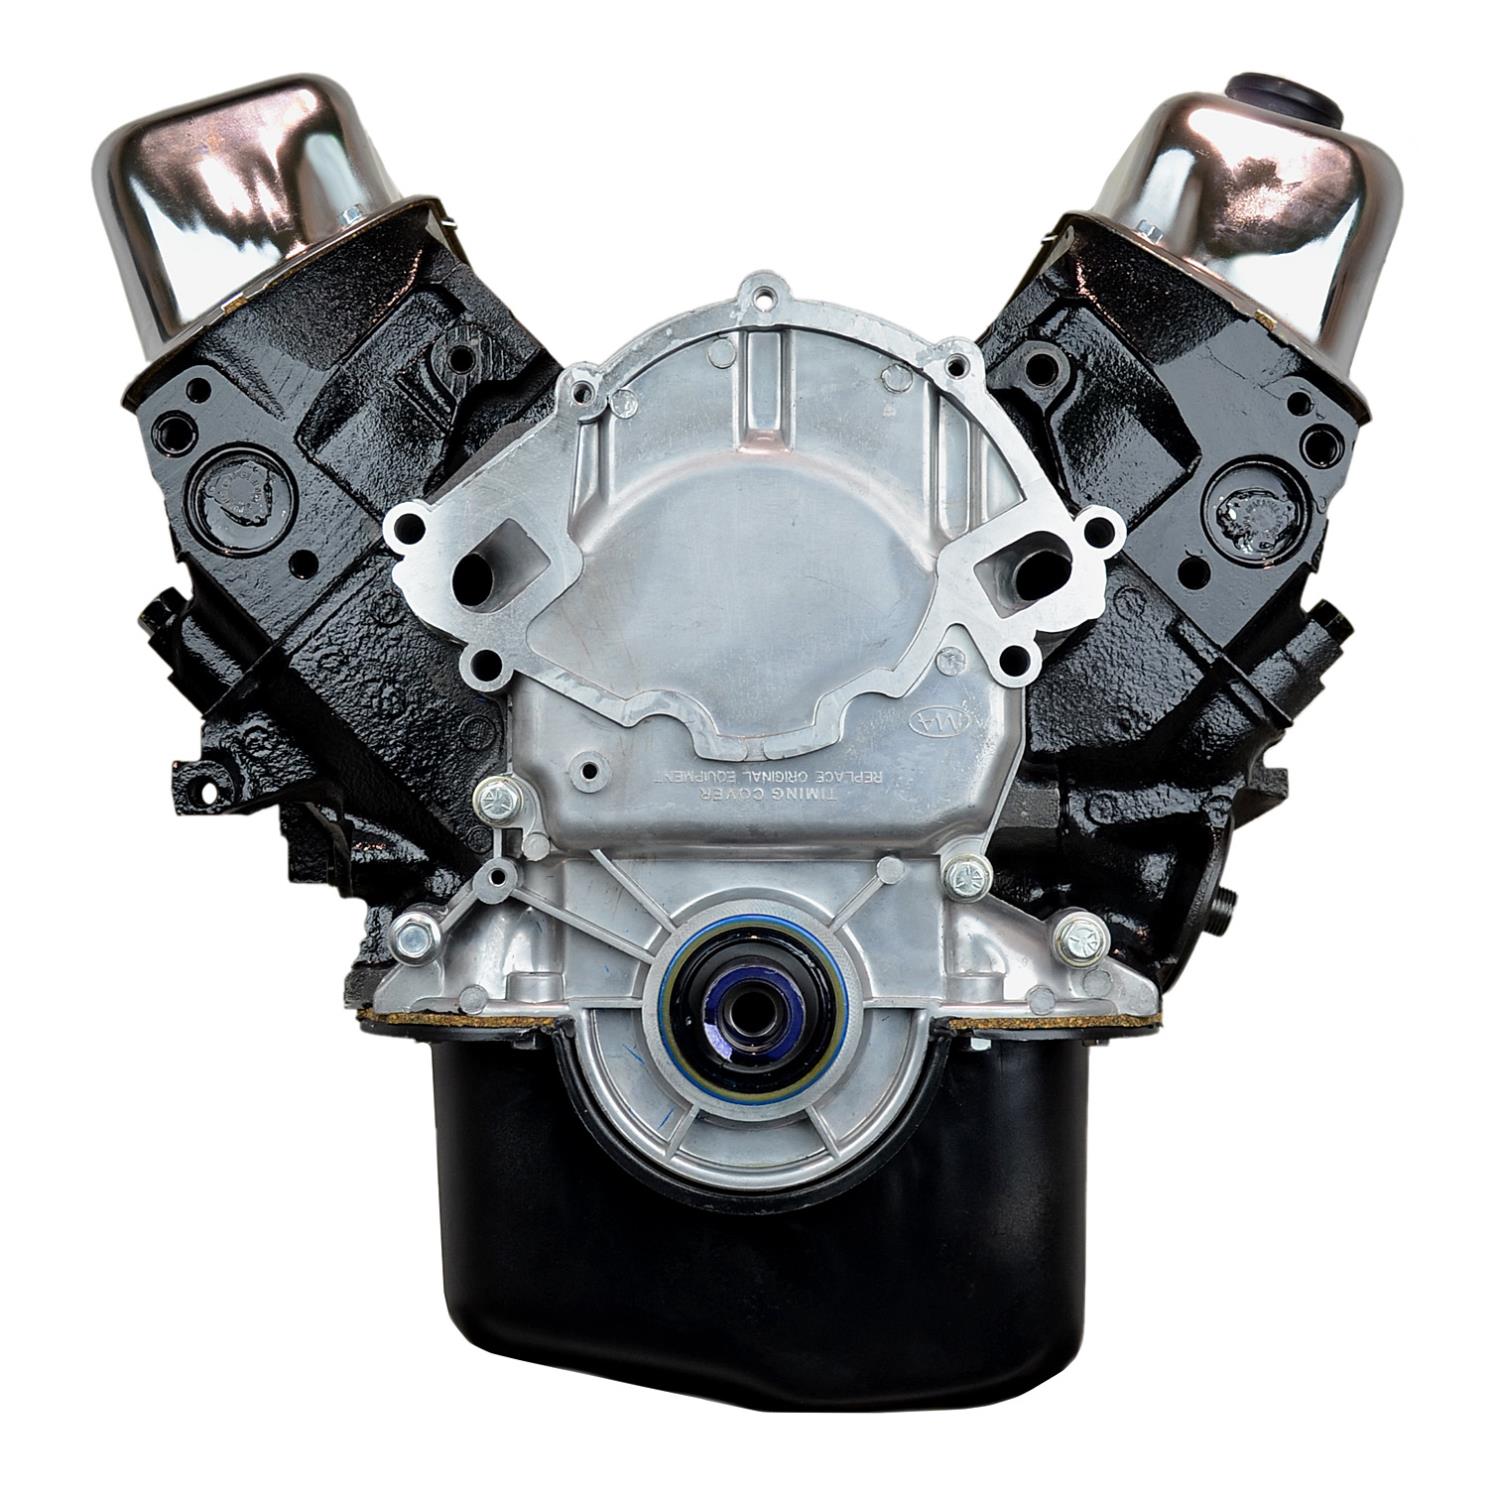 VFA4 Remanufactured Crate Engine for 1987-1991 Ford F-Series Truck & E-Series Van with 302ci/5.0L V8